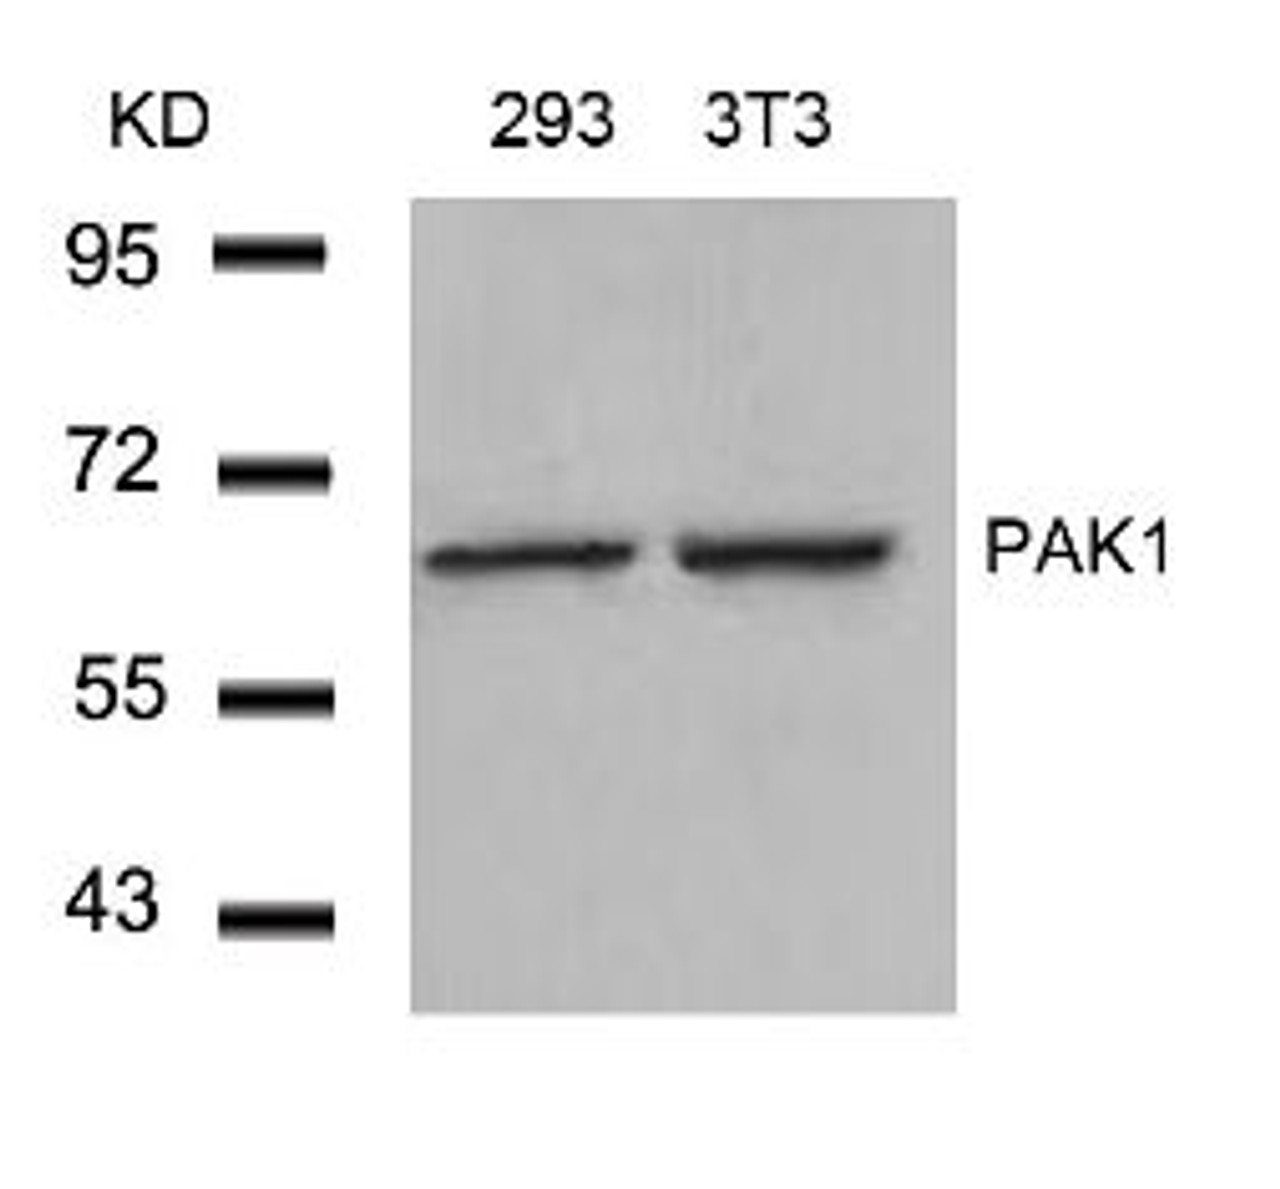 Western blot analysis of lysed extracts from 293 and 3T3 cells using PAK1 (Ab-212) .